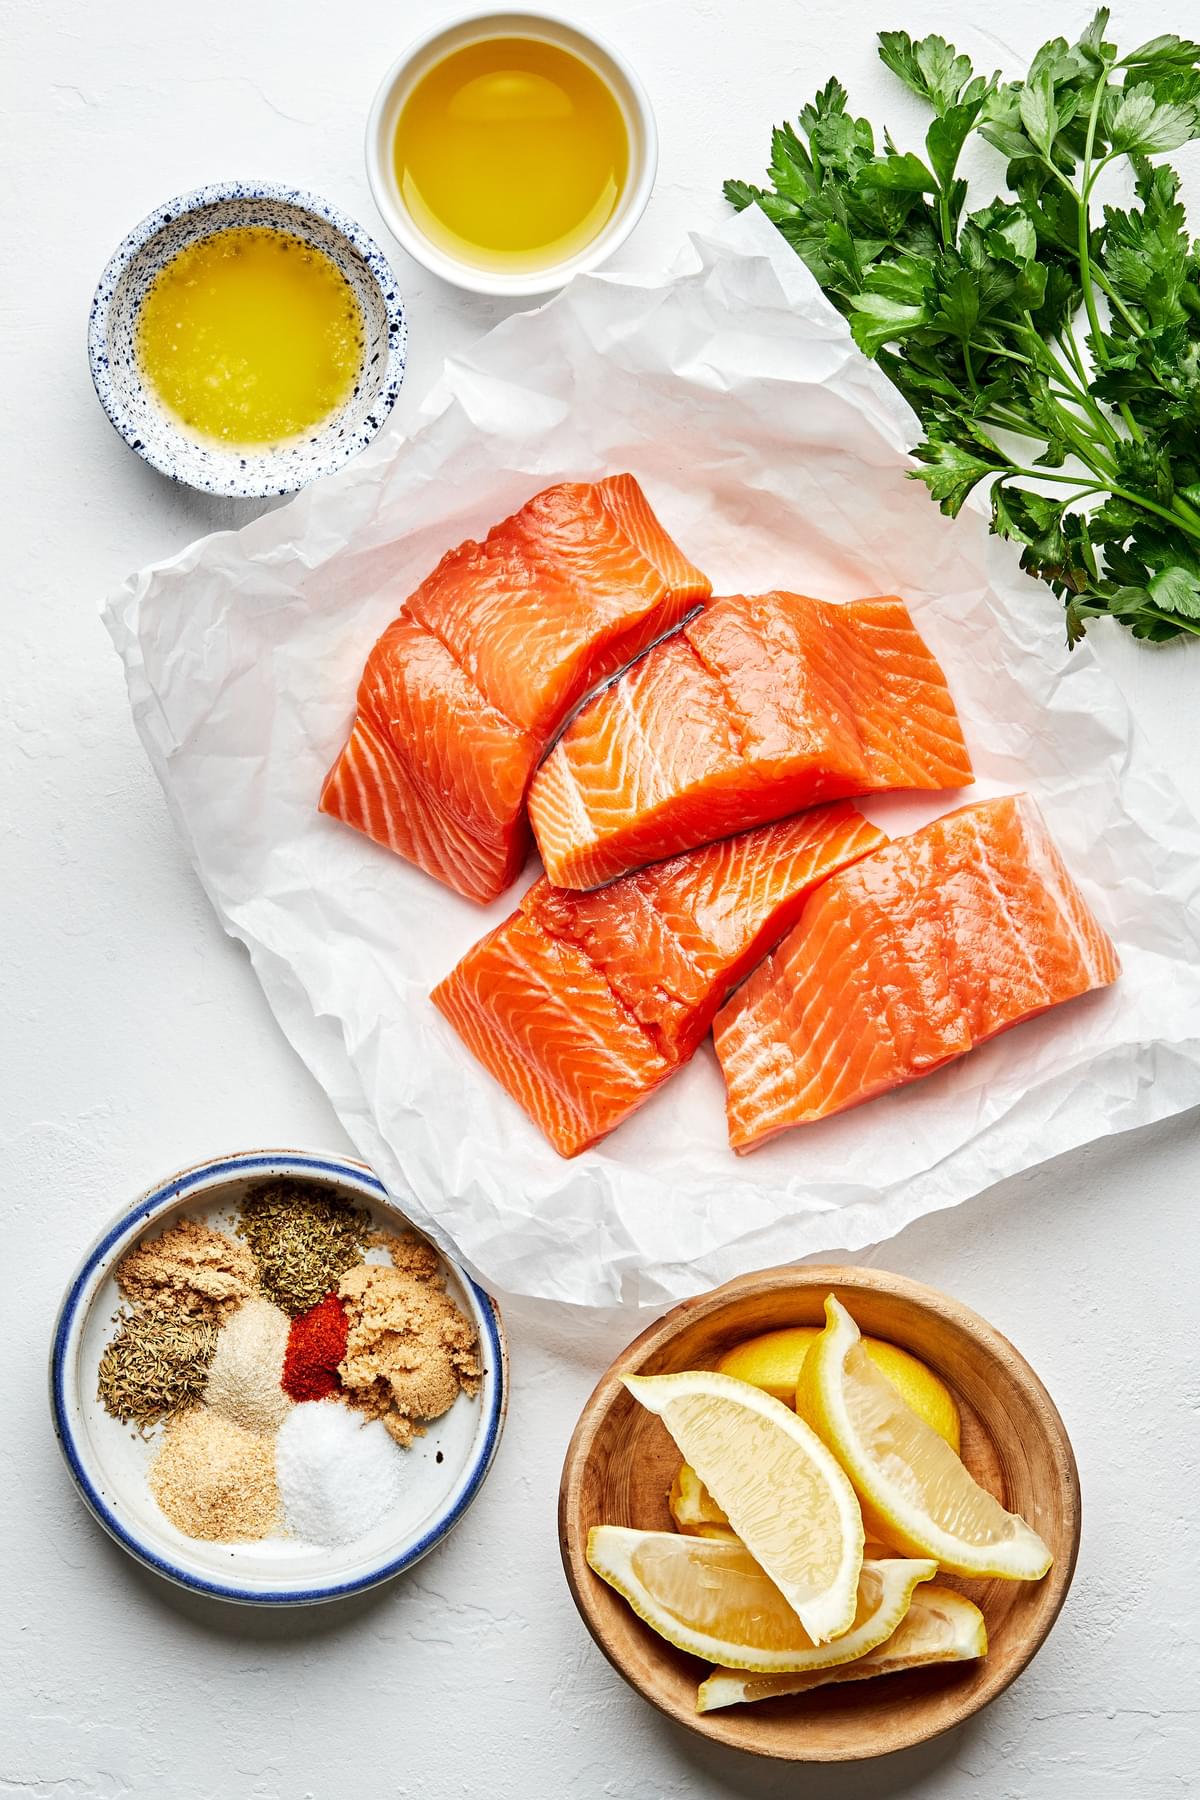 four 4-ounce raw salmon filets, melted butter, spices, lemon wedges and parsley in bowls to make blackened salmon